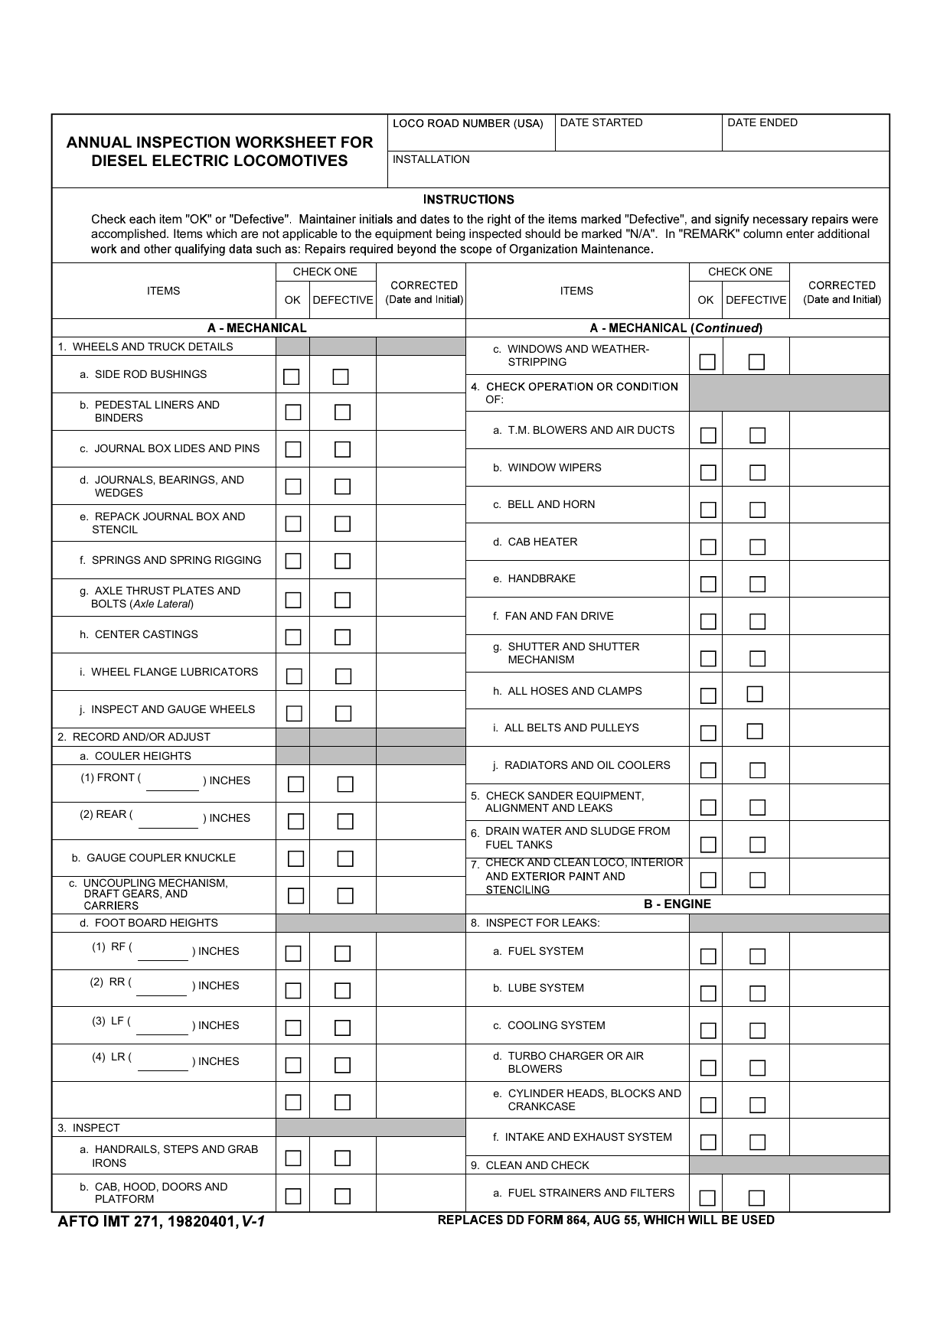 AFTO IMT Form 271 Annual Inspection Worksheet for Diesel Electric Locomotives, Page 1